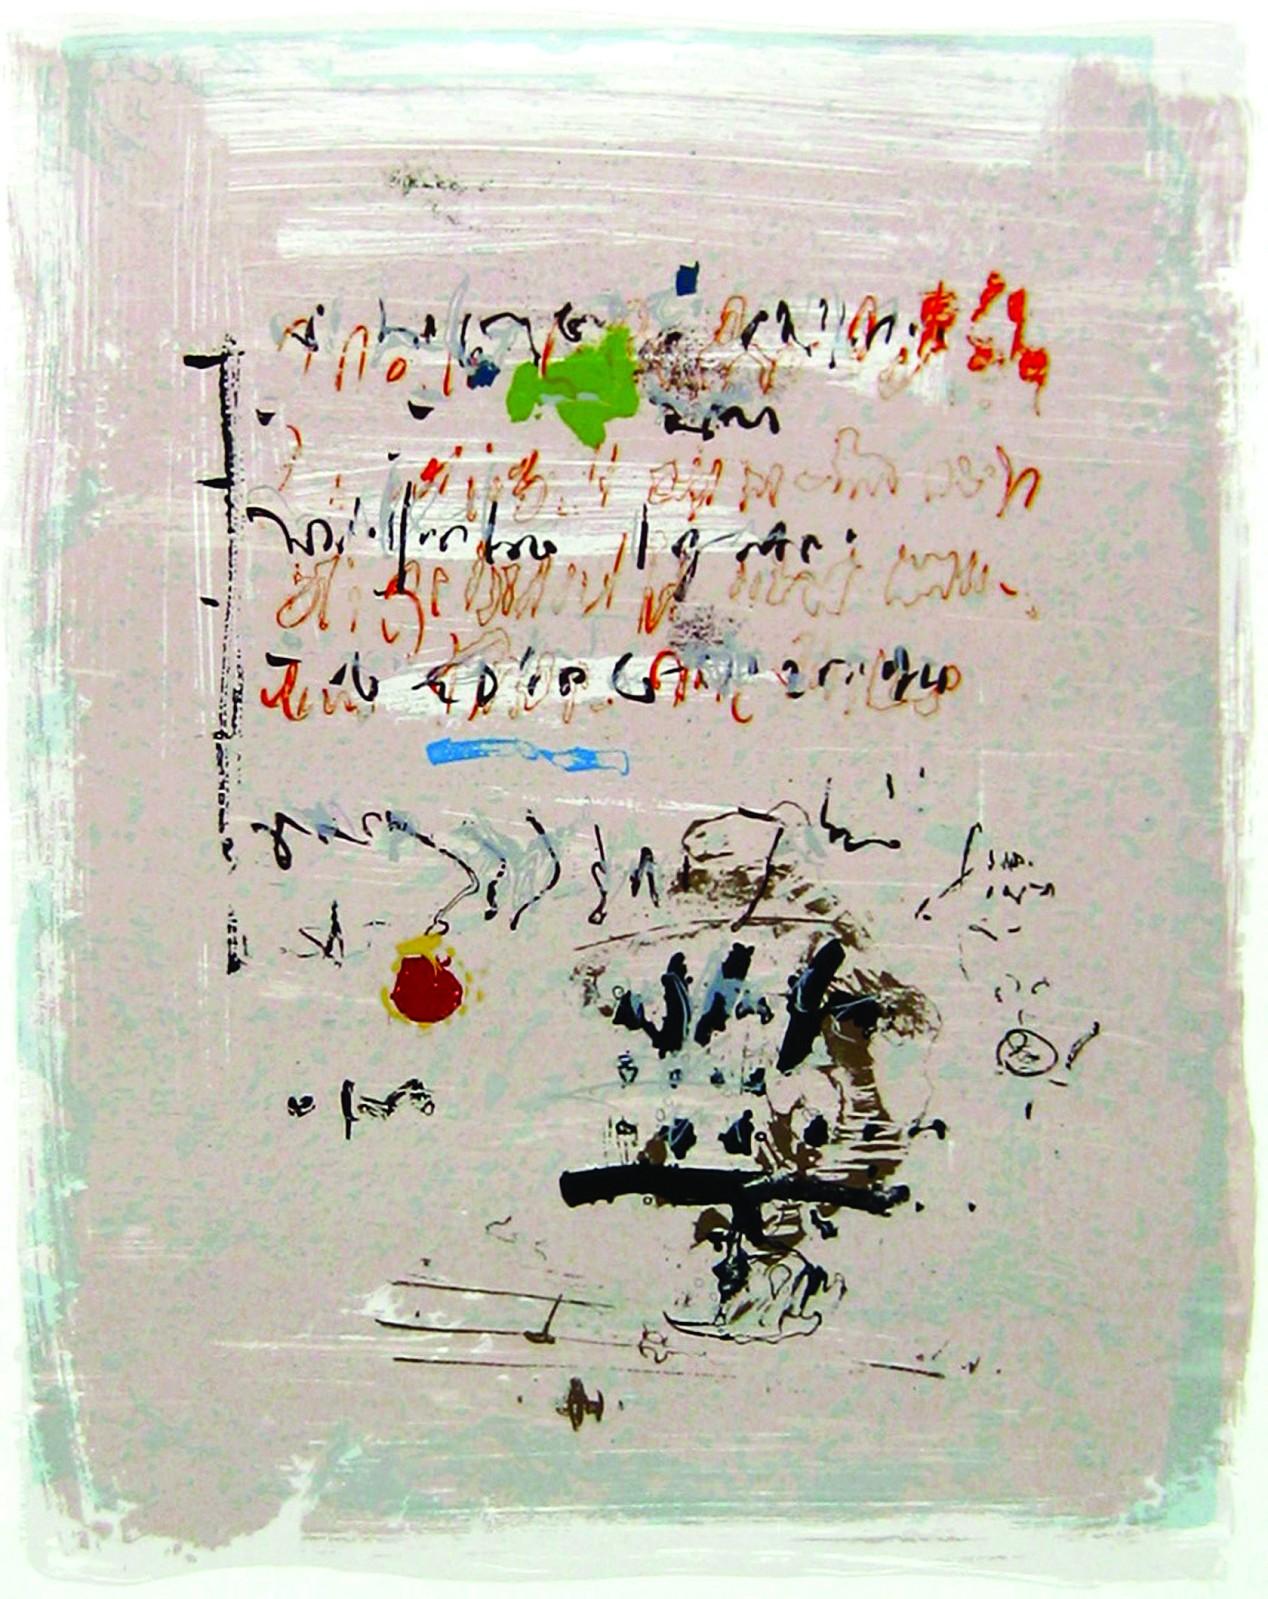 Alice Teichert Abstract Print - Text - Solid Bass - 10/35 - colorful, calligraphic gestures, serigraph on paper 